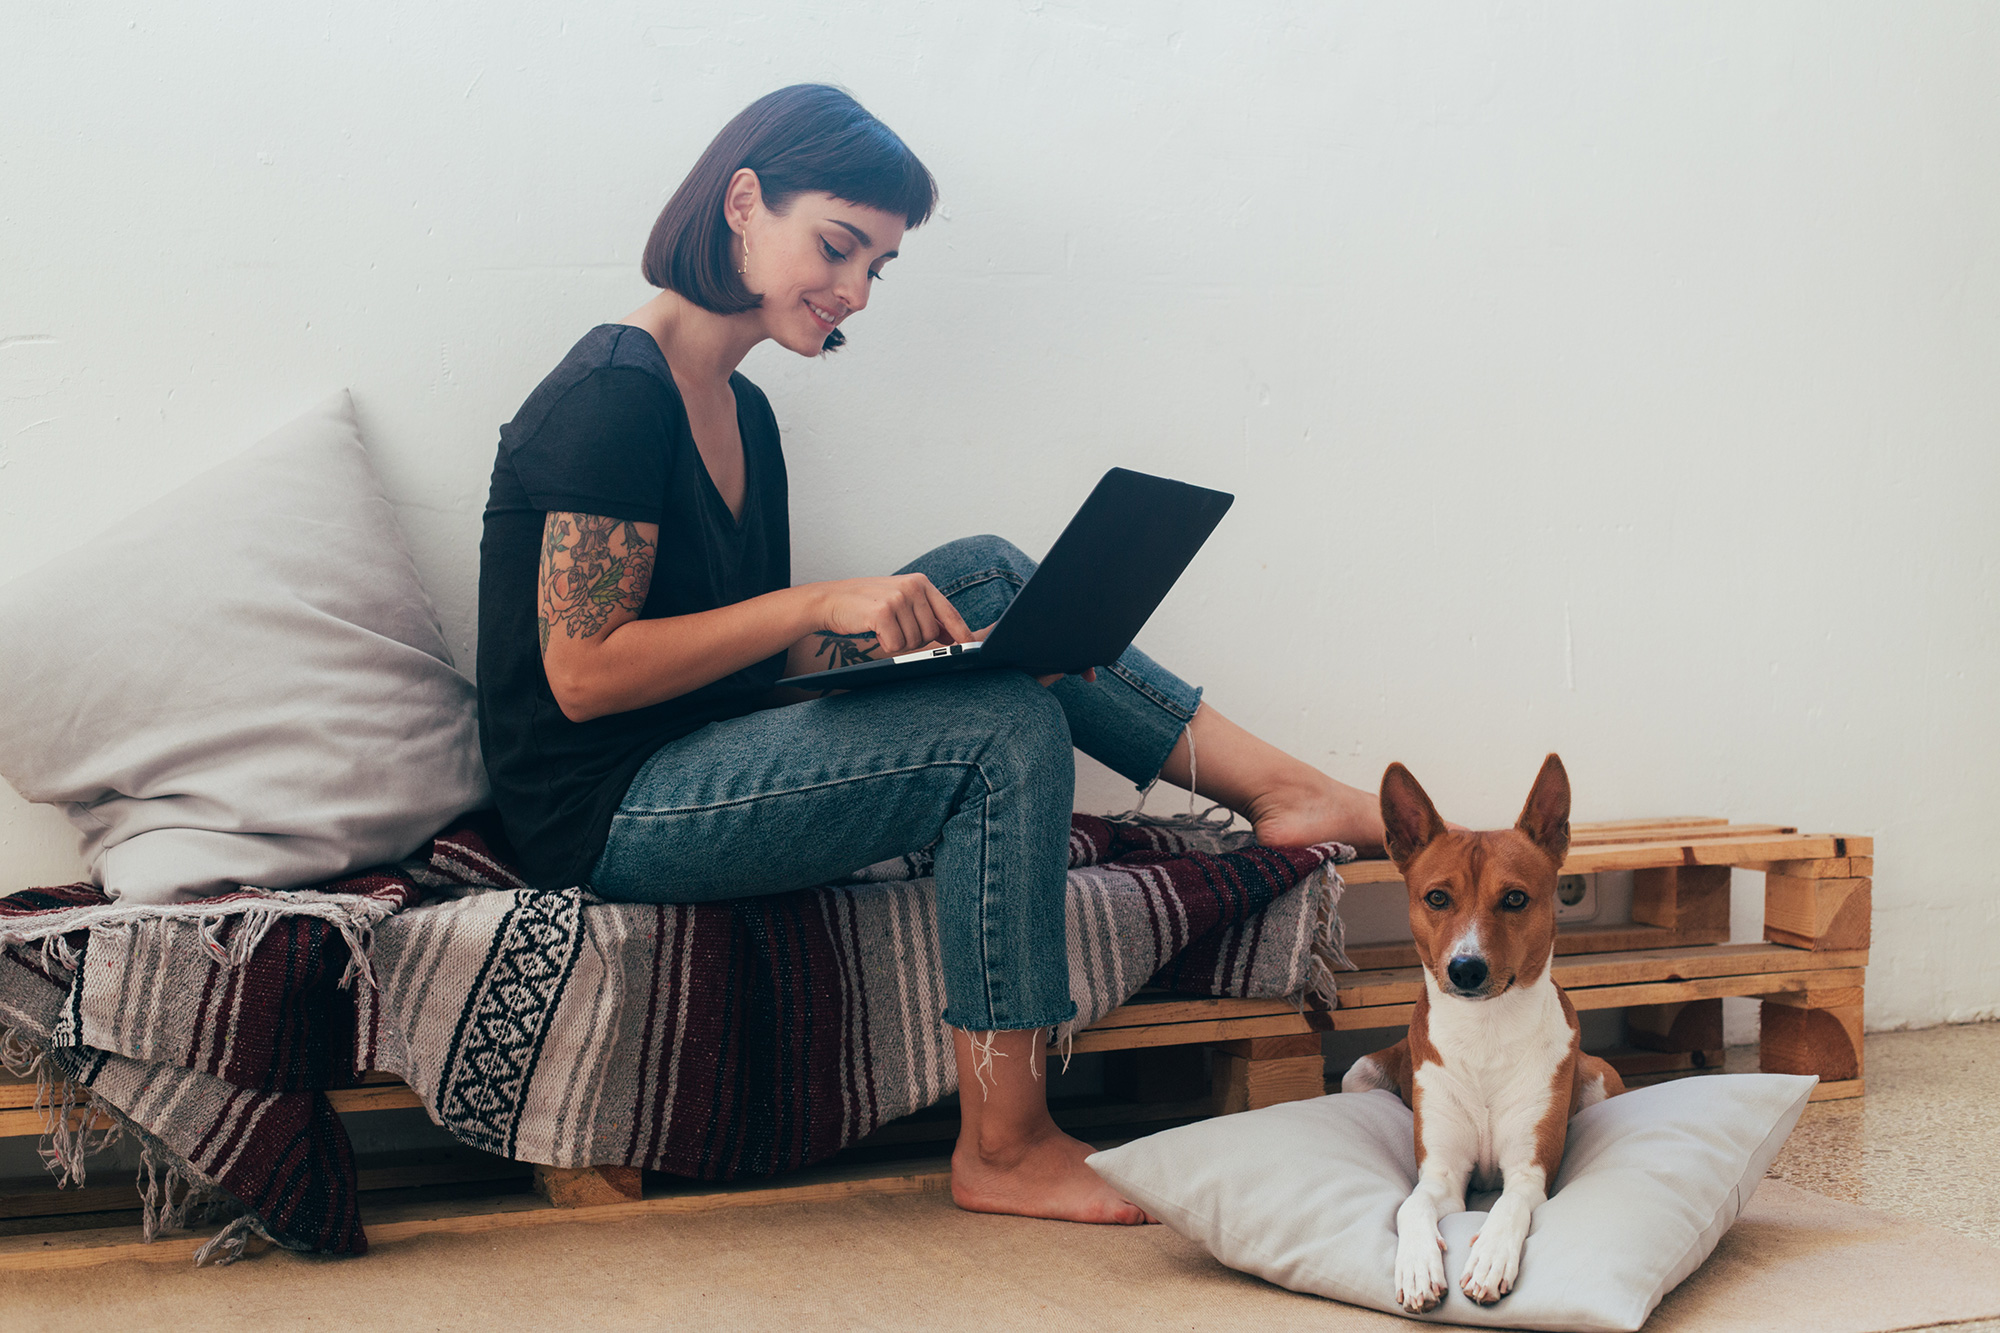 Woman working from home with dog